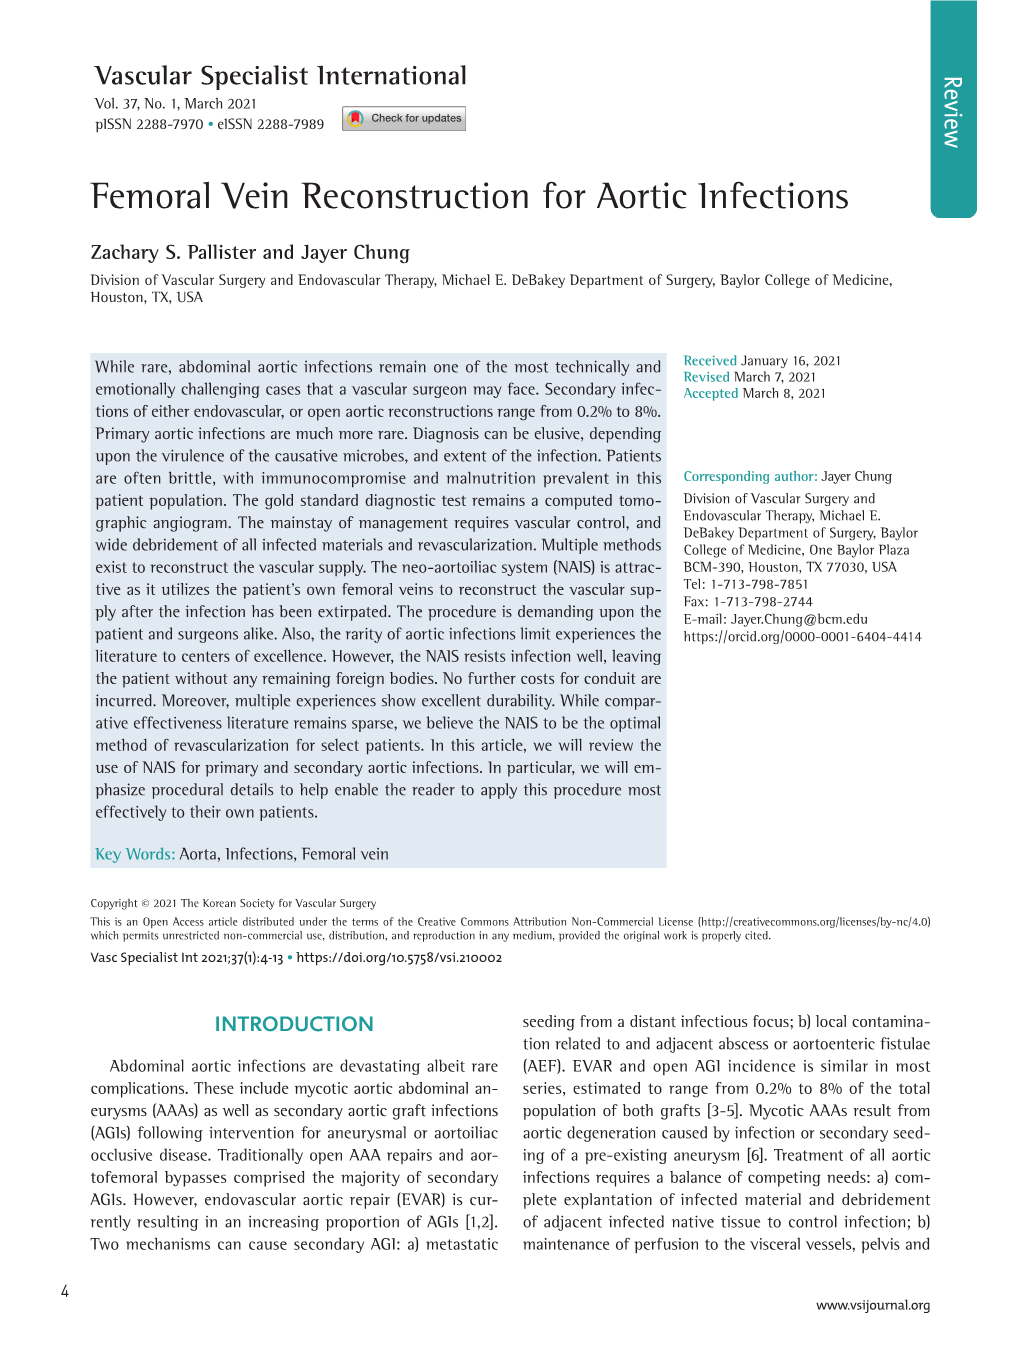 Femoral Vein Reconstruction for Aortic Infections